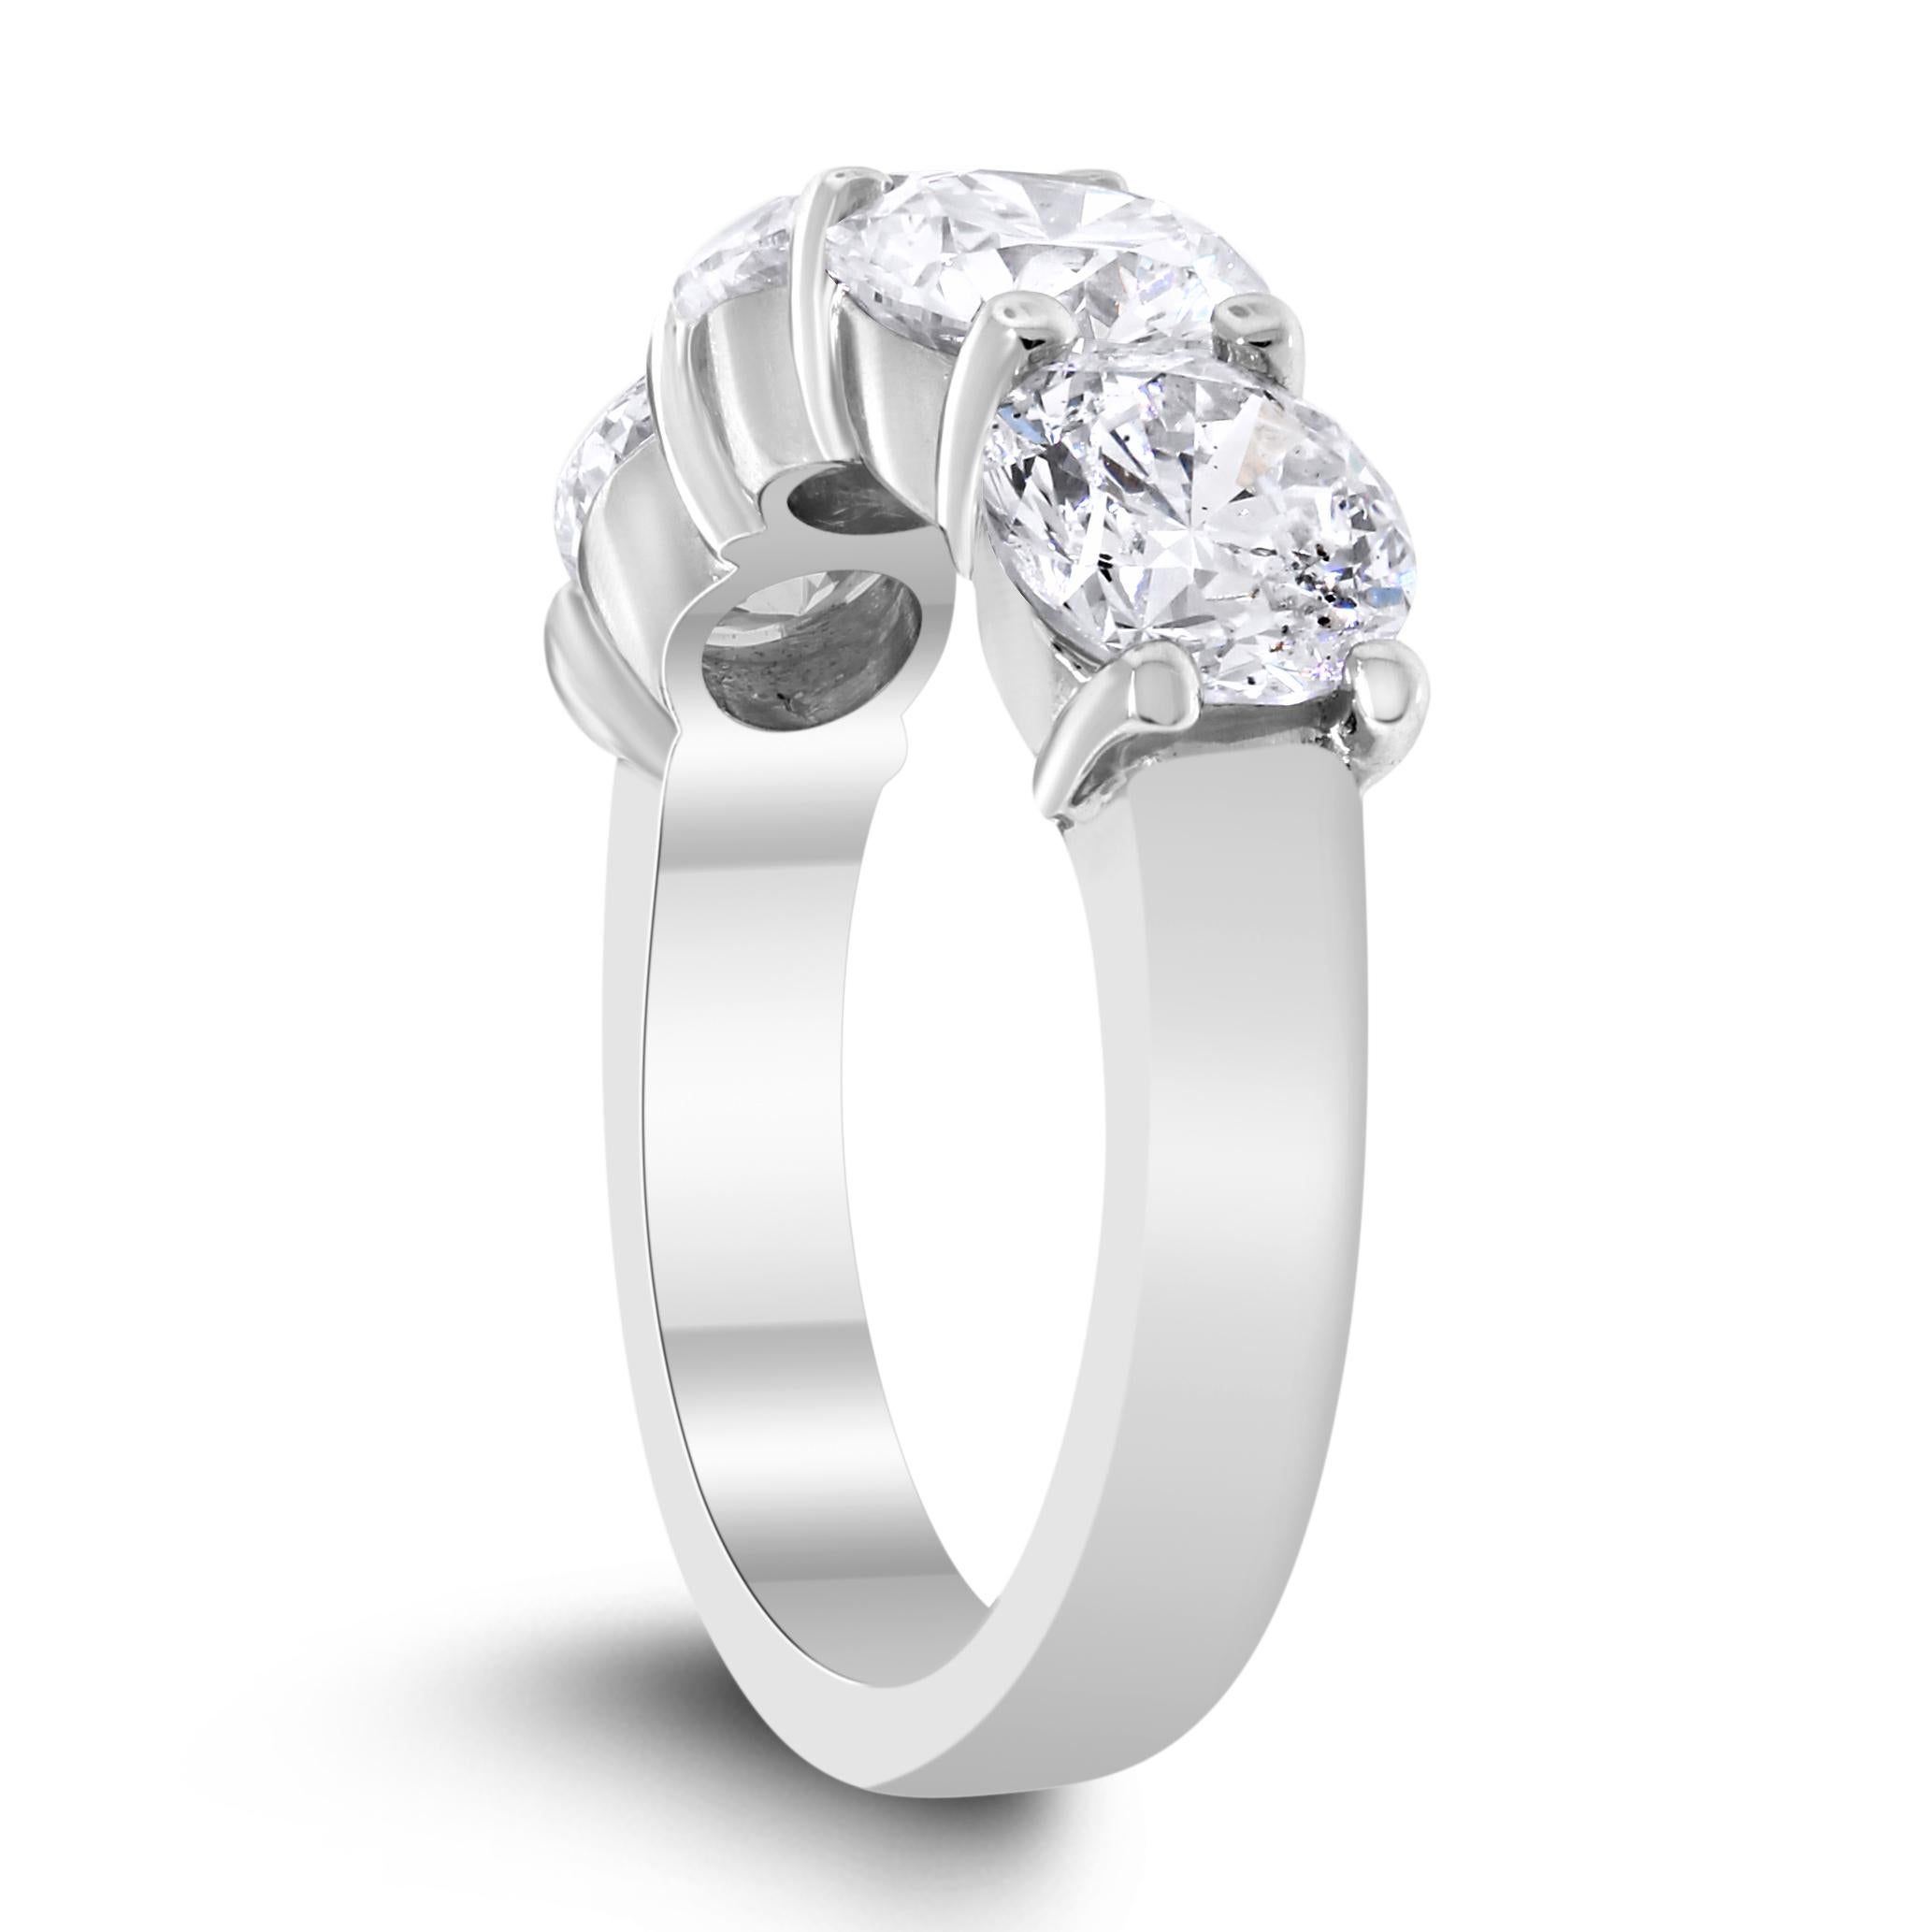 This 4 Diamond Band is a simple and classic style that compliments and enhances any traditional engagement ring, yet also makes a statement worn independently. 
The 4 H Color SI1 Clarity diamonds are eye clean and ideally matched to create a